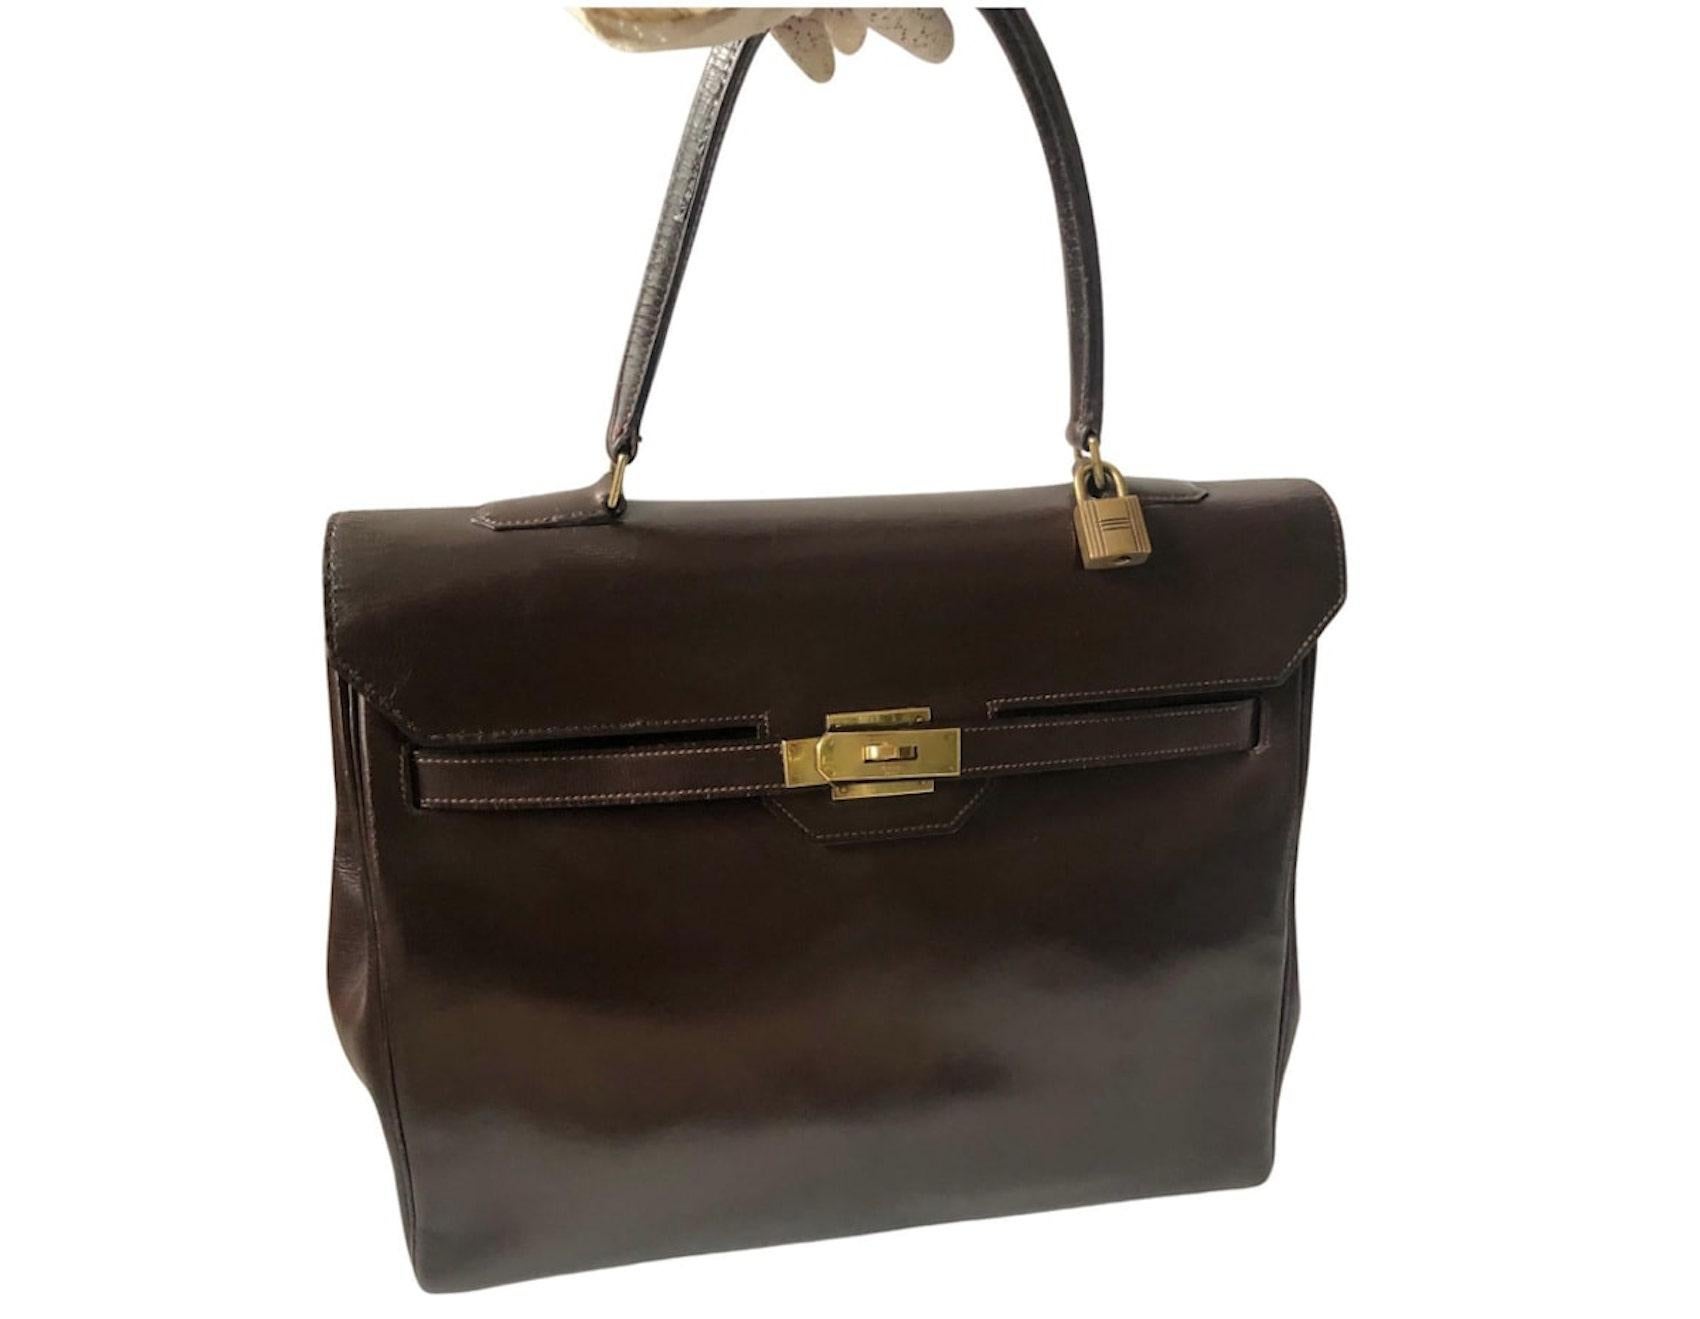 A 1969 Hermès brown box leather Monaco Kelly 30 tote bag featuring a fold-over top with a gold tone push-lock closure, a single top handle, plated gold-tone. Interior with one double patch pockets and one patch pocket, interior is in brown leather.